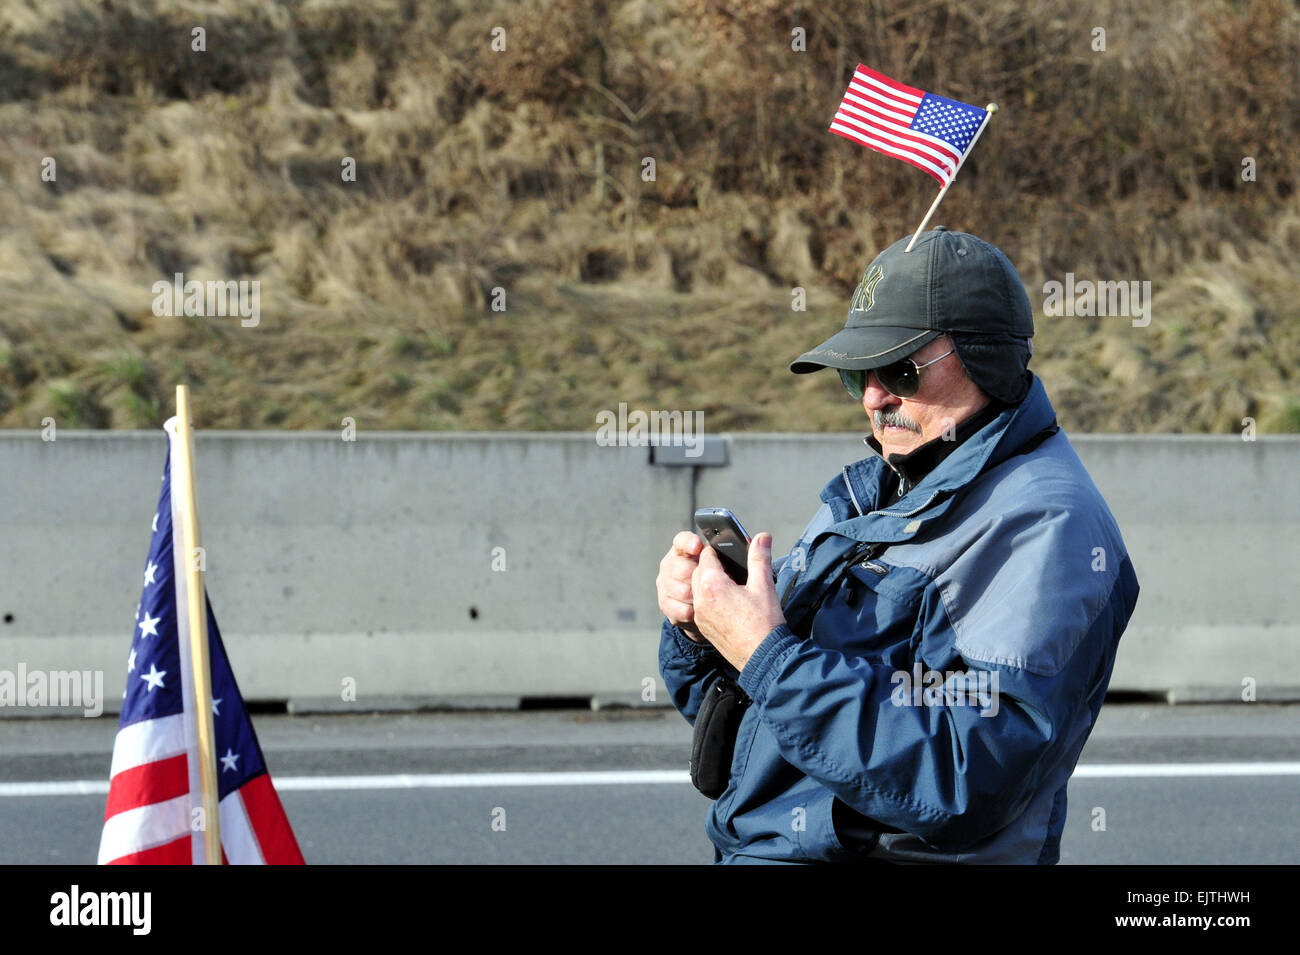 Prague, Czech Republic, 01st Apr, 2015. Hundreds of supporters including members of historical army club wait along the roads to greet the U.S. military convoy, near Pilsen, Czech Republic, April 1, 2015. The Convoy left the barracks in Prague-Ruzyne and heads for the Rozvadov-Waidhaus, west Bohemia, border with Germany. The troops continue to the Vilseck military base in Bavaria. Some 500 soldiers on around 115 armoured vehicles are crossing the Czech Republic during the 'Dragoon Ride' to demonstrate support for the allies' territories that feel threatened by the Russian aggression in Ukraine Stock Photo